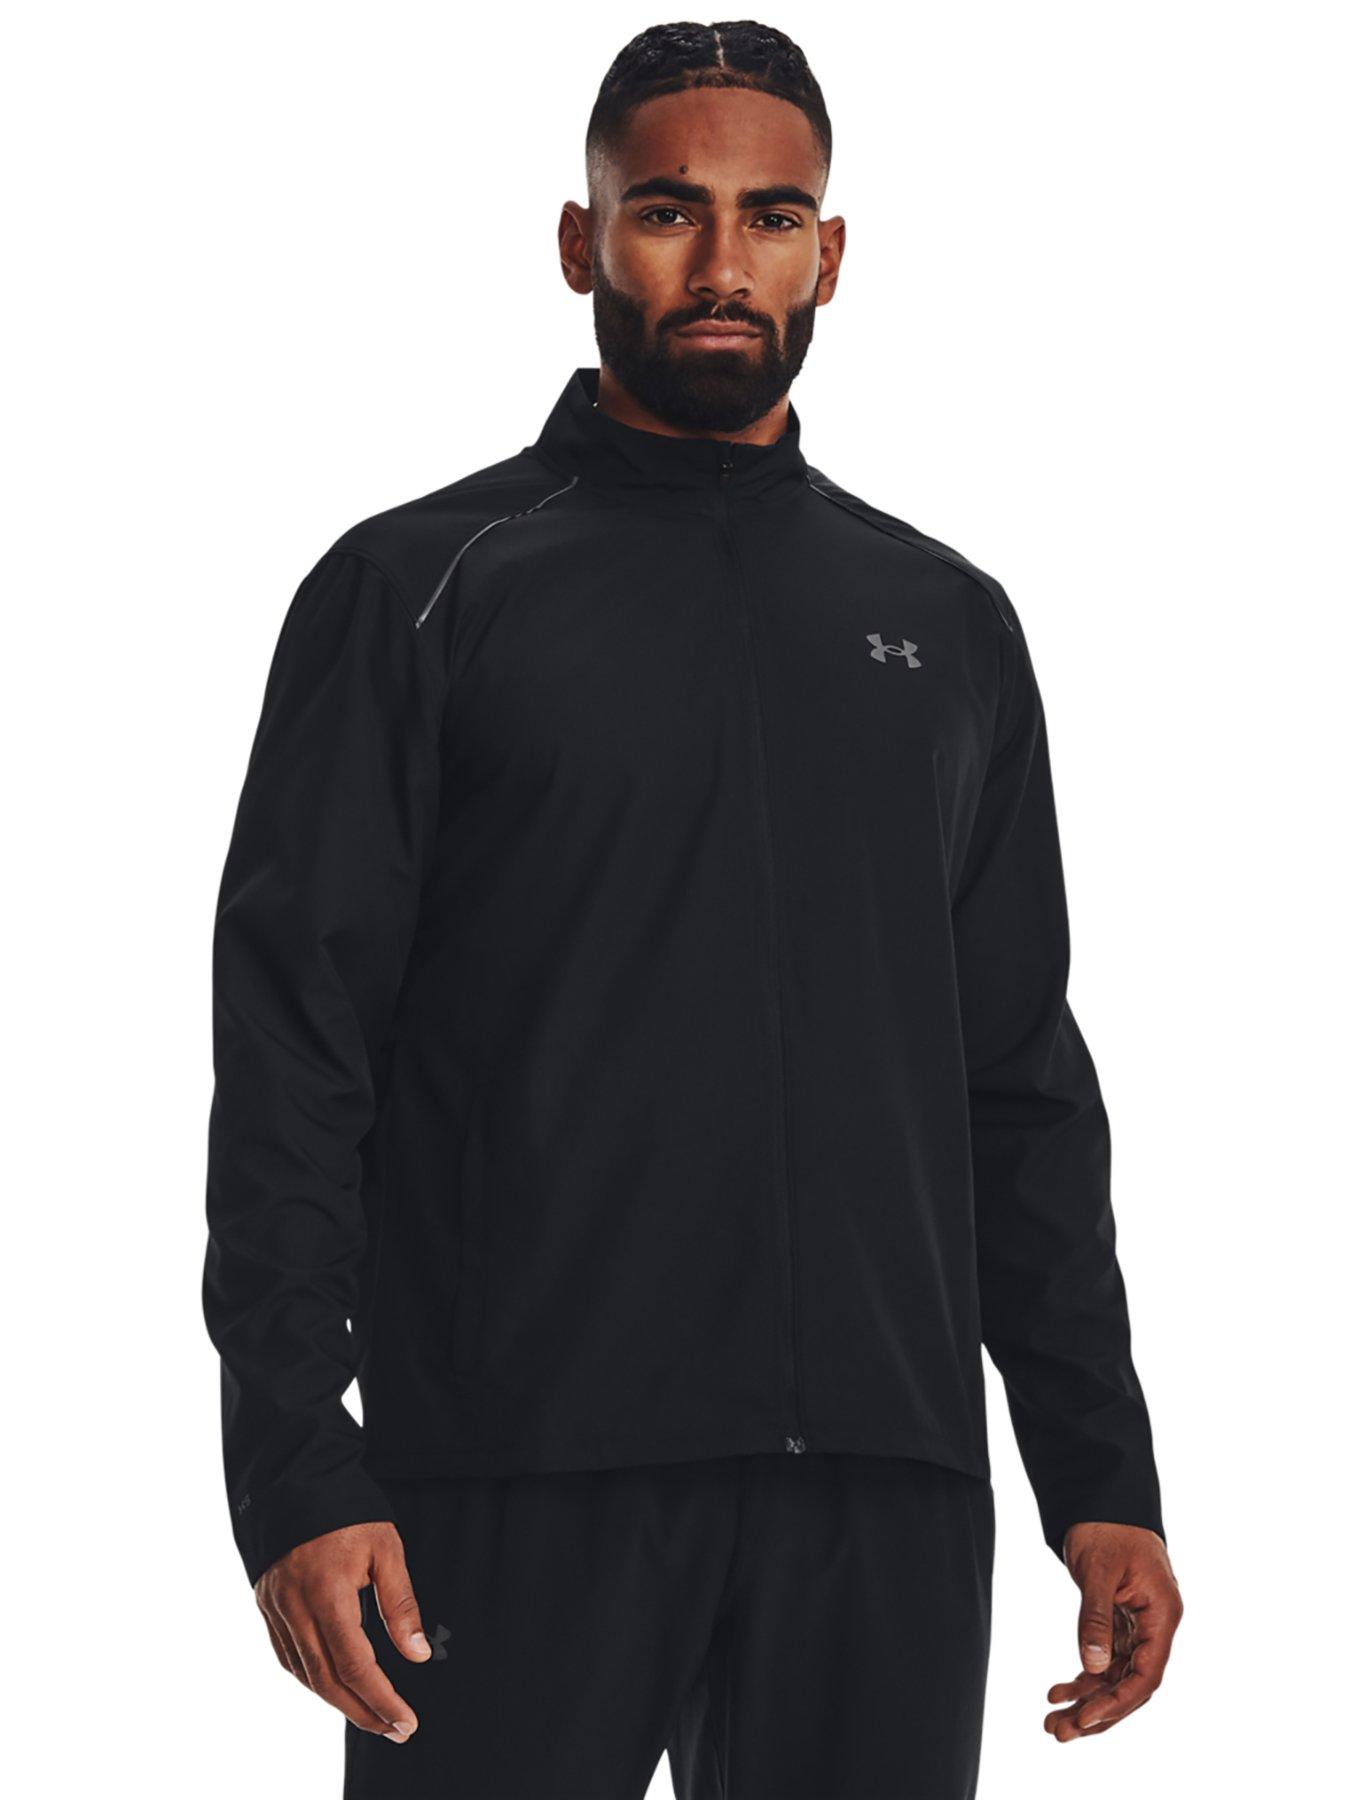 Under armour, Jackets, Mens sports clothing, Sports & leisure